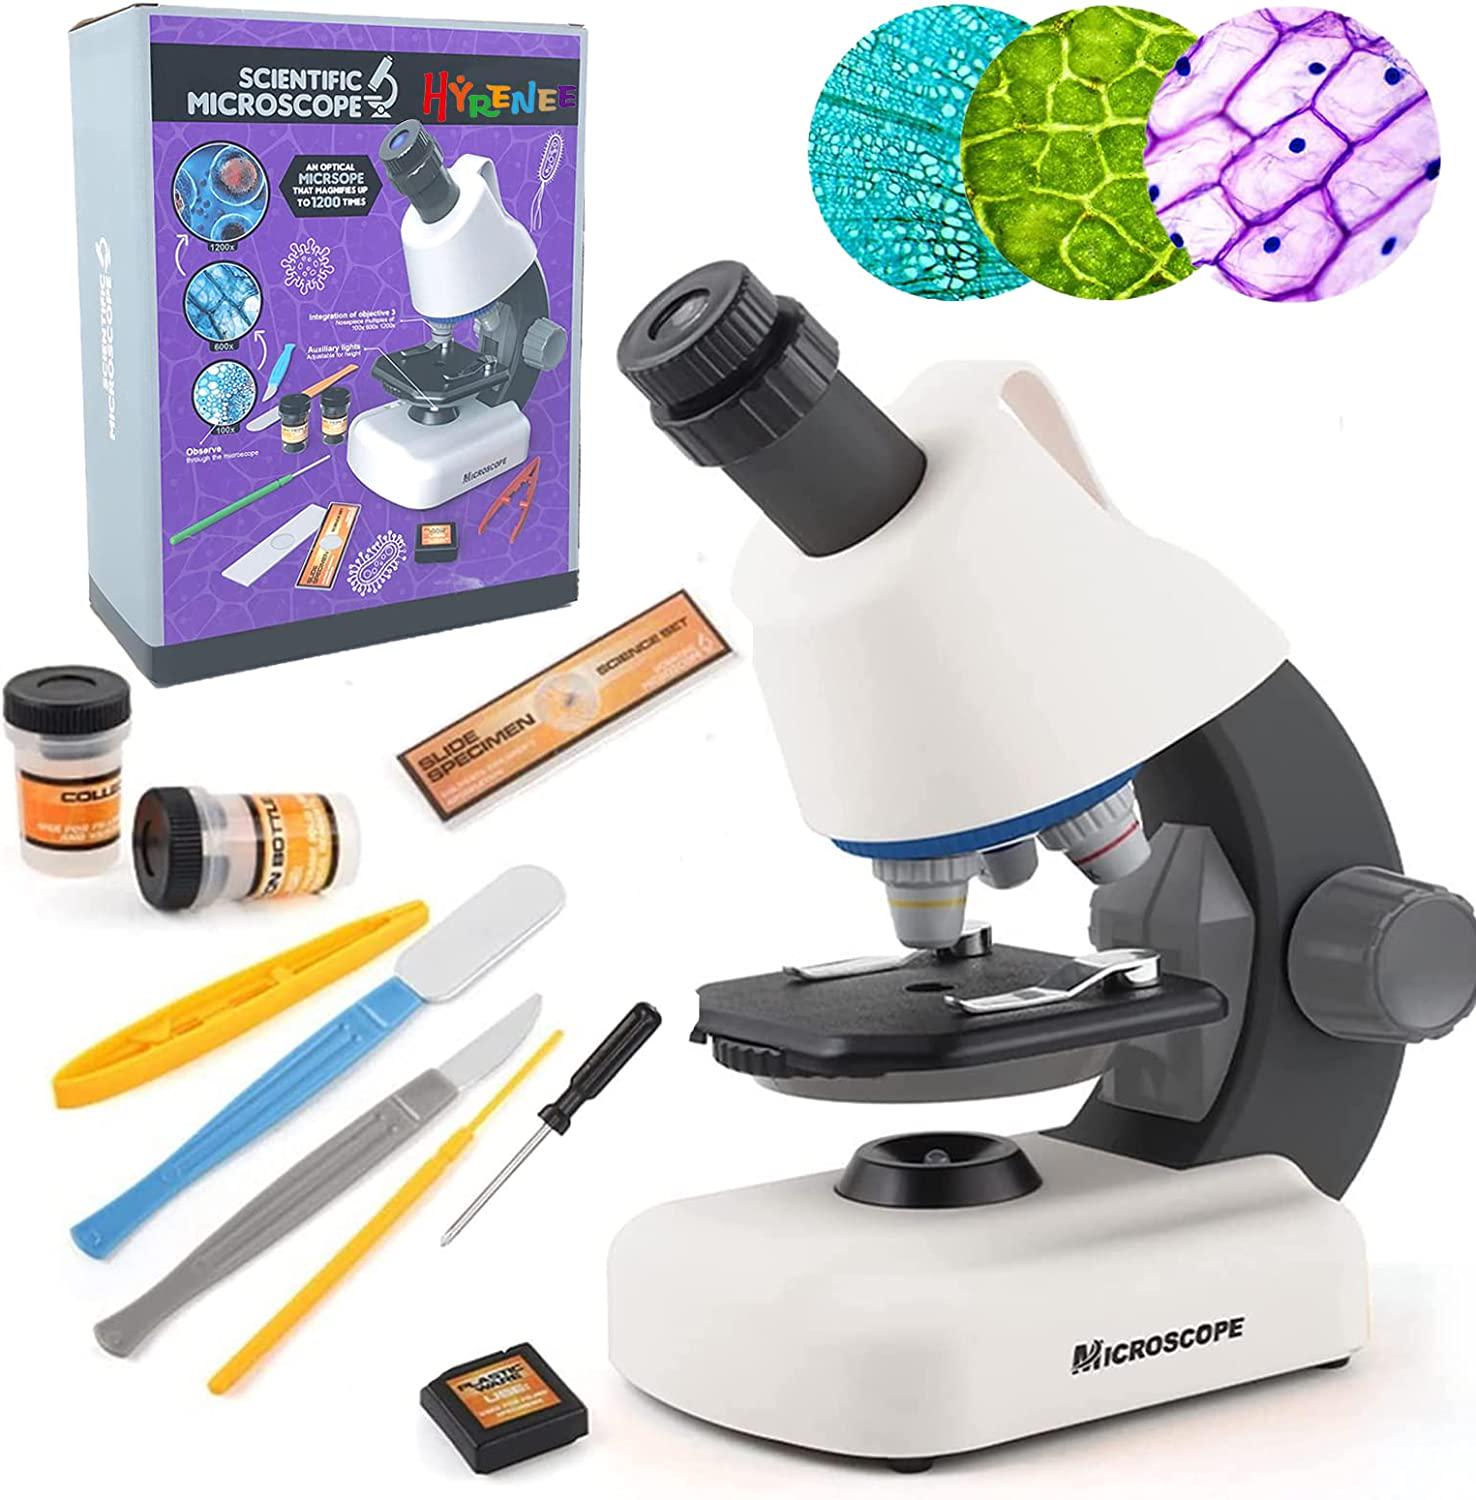 HYRENEE, Microscope for Kids 100X-1200X, Student Beginner Microscope STEM Kit with Microscope, Slide Specimen, LED Light, Science Experiment Microscope Kit for Kids 8-12 Years Old